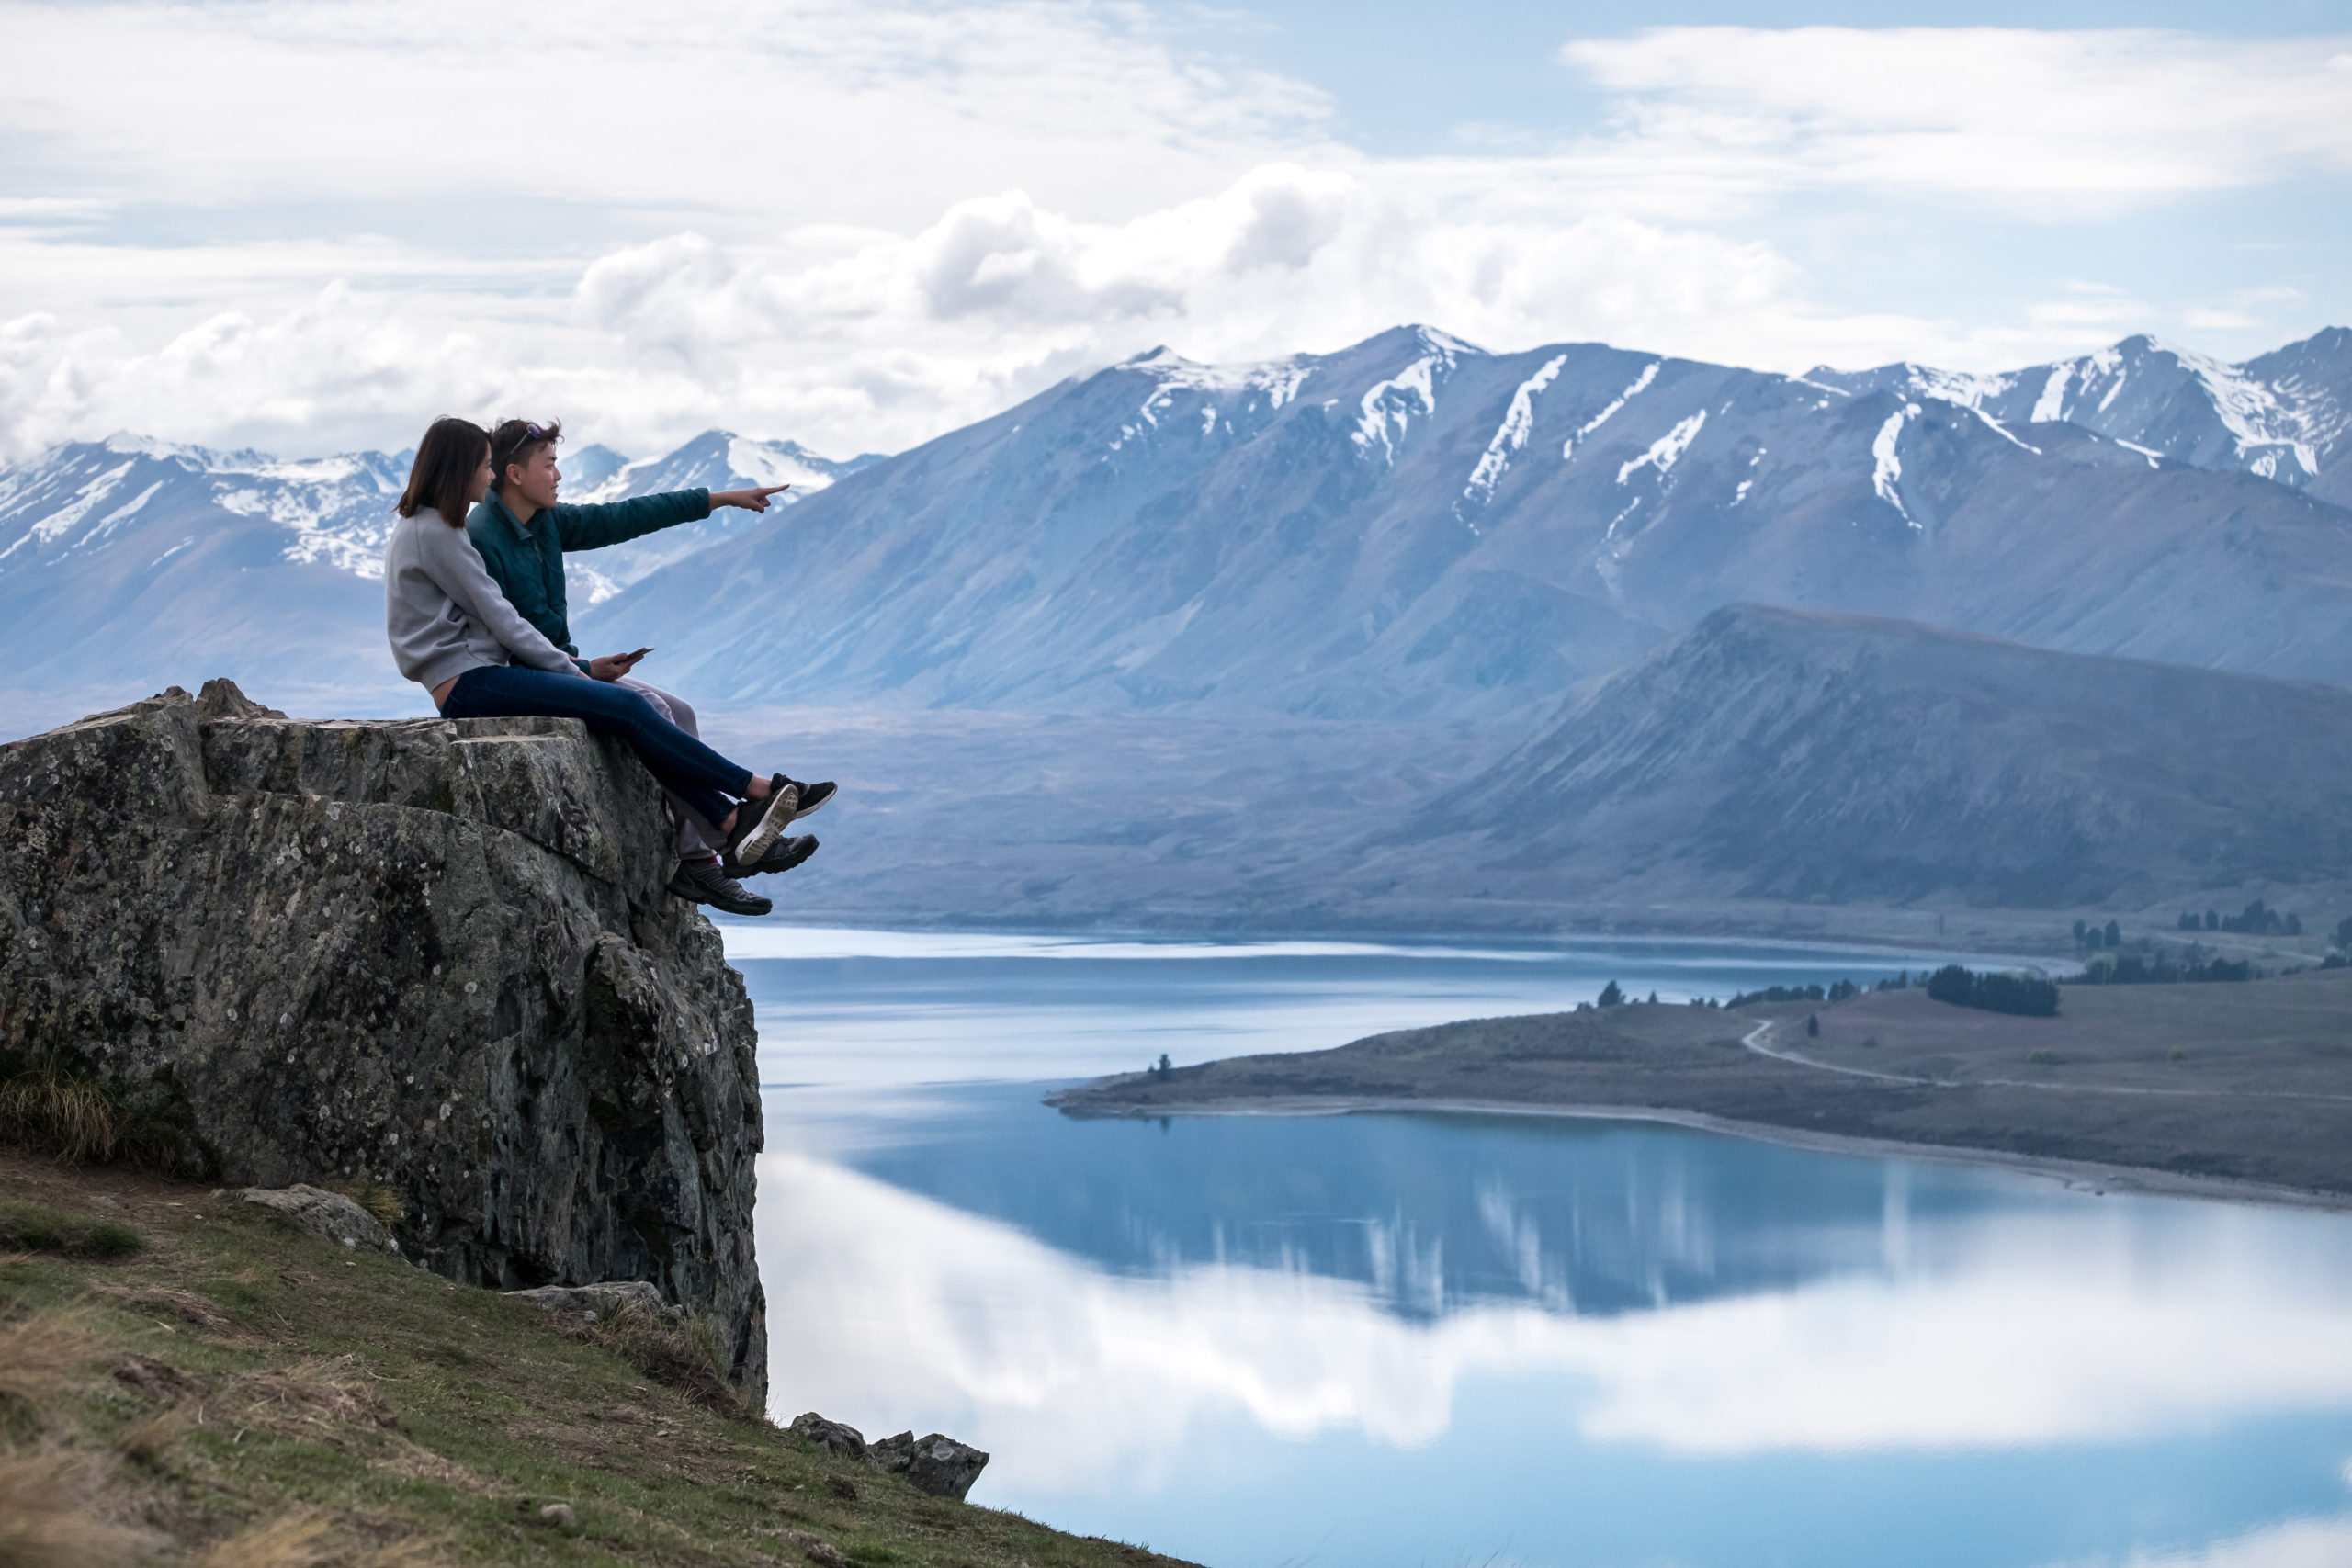 The dream: The holidaymakers anticipate spectacular scenery and wild vistas in New Zealand